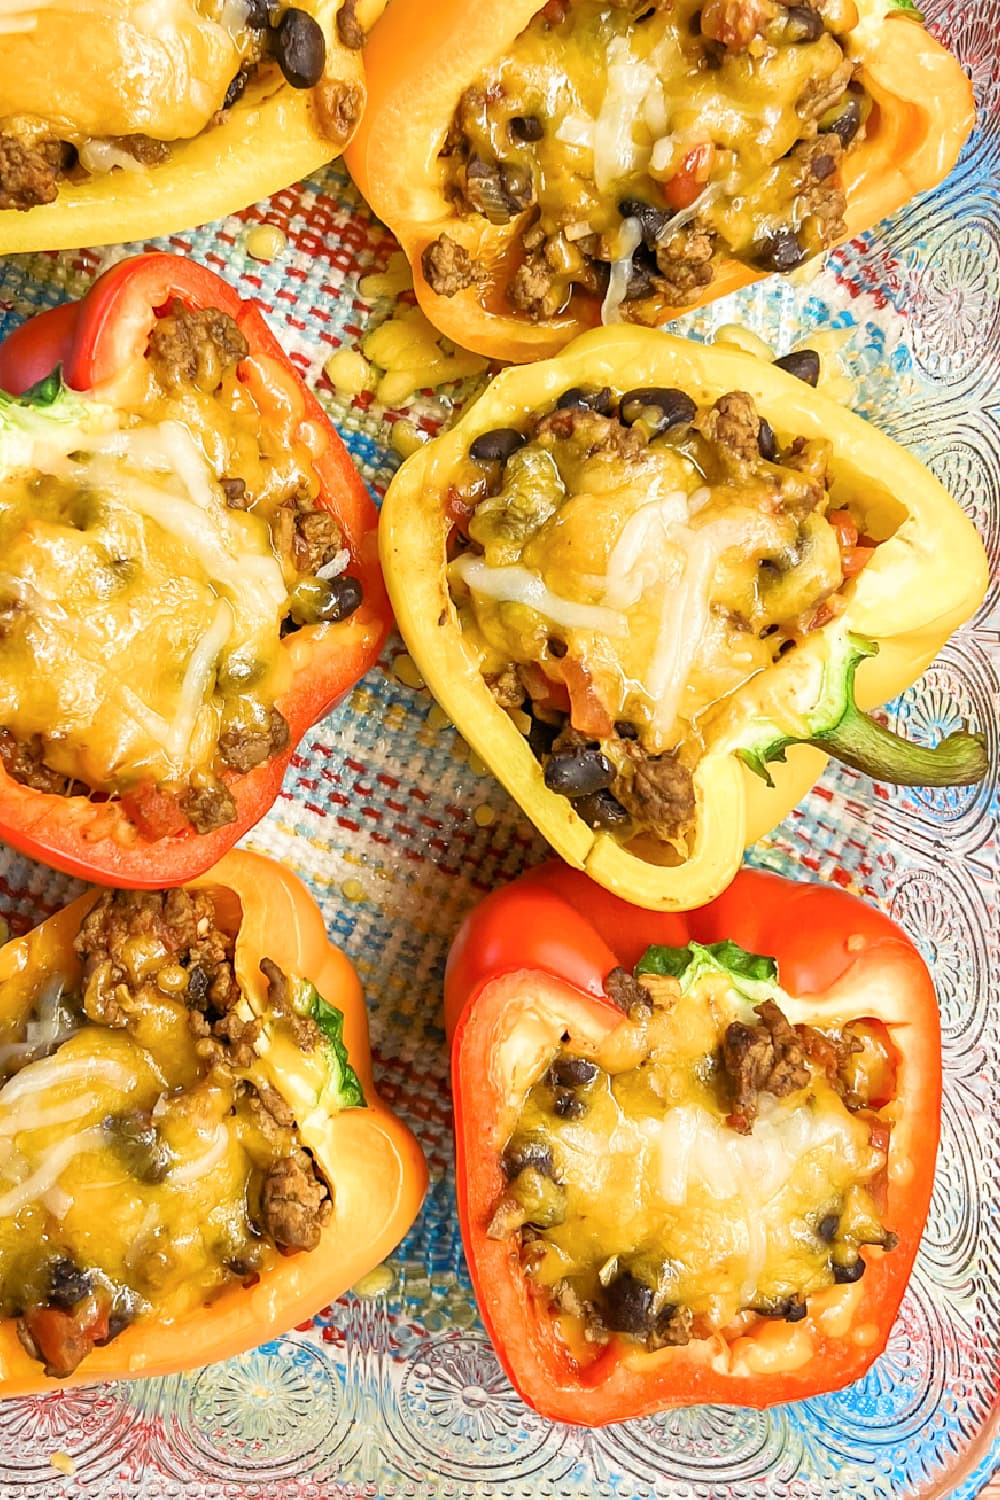 Hot and fresh stuffed bell peppers with cheese on top.